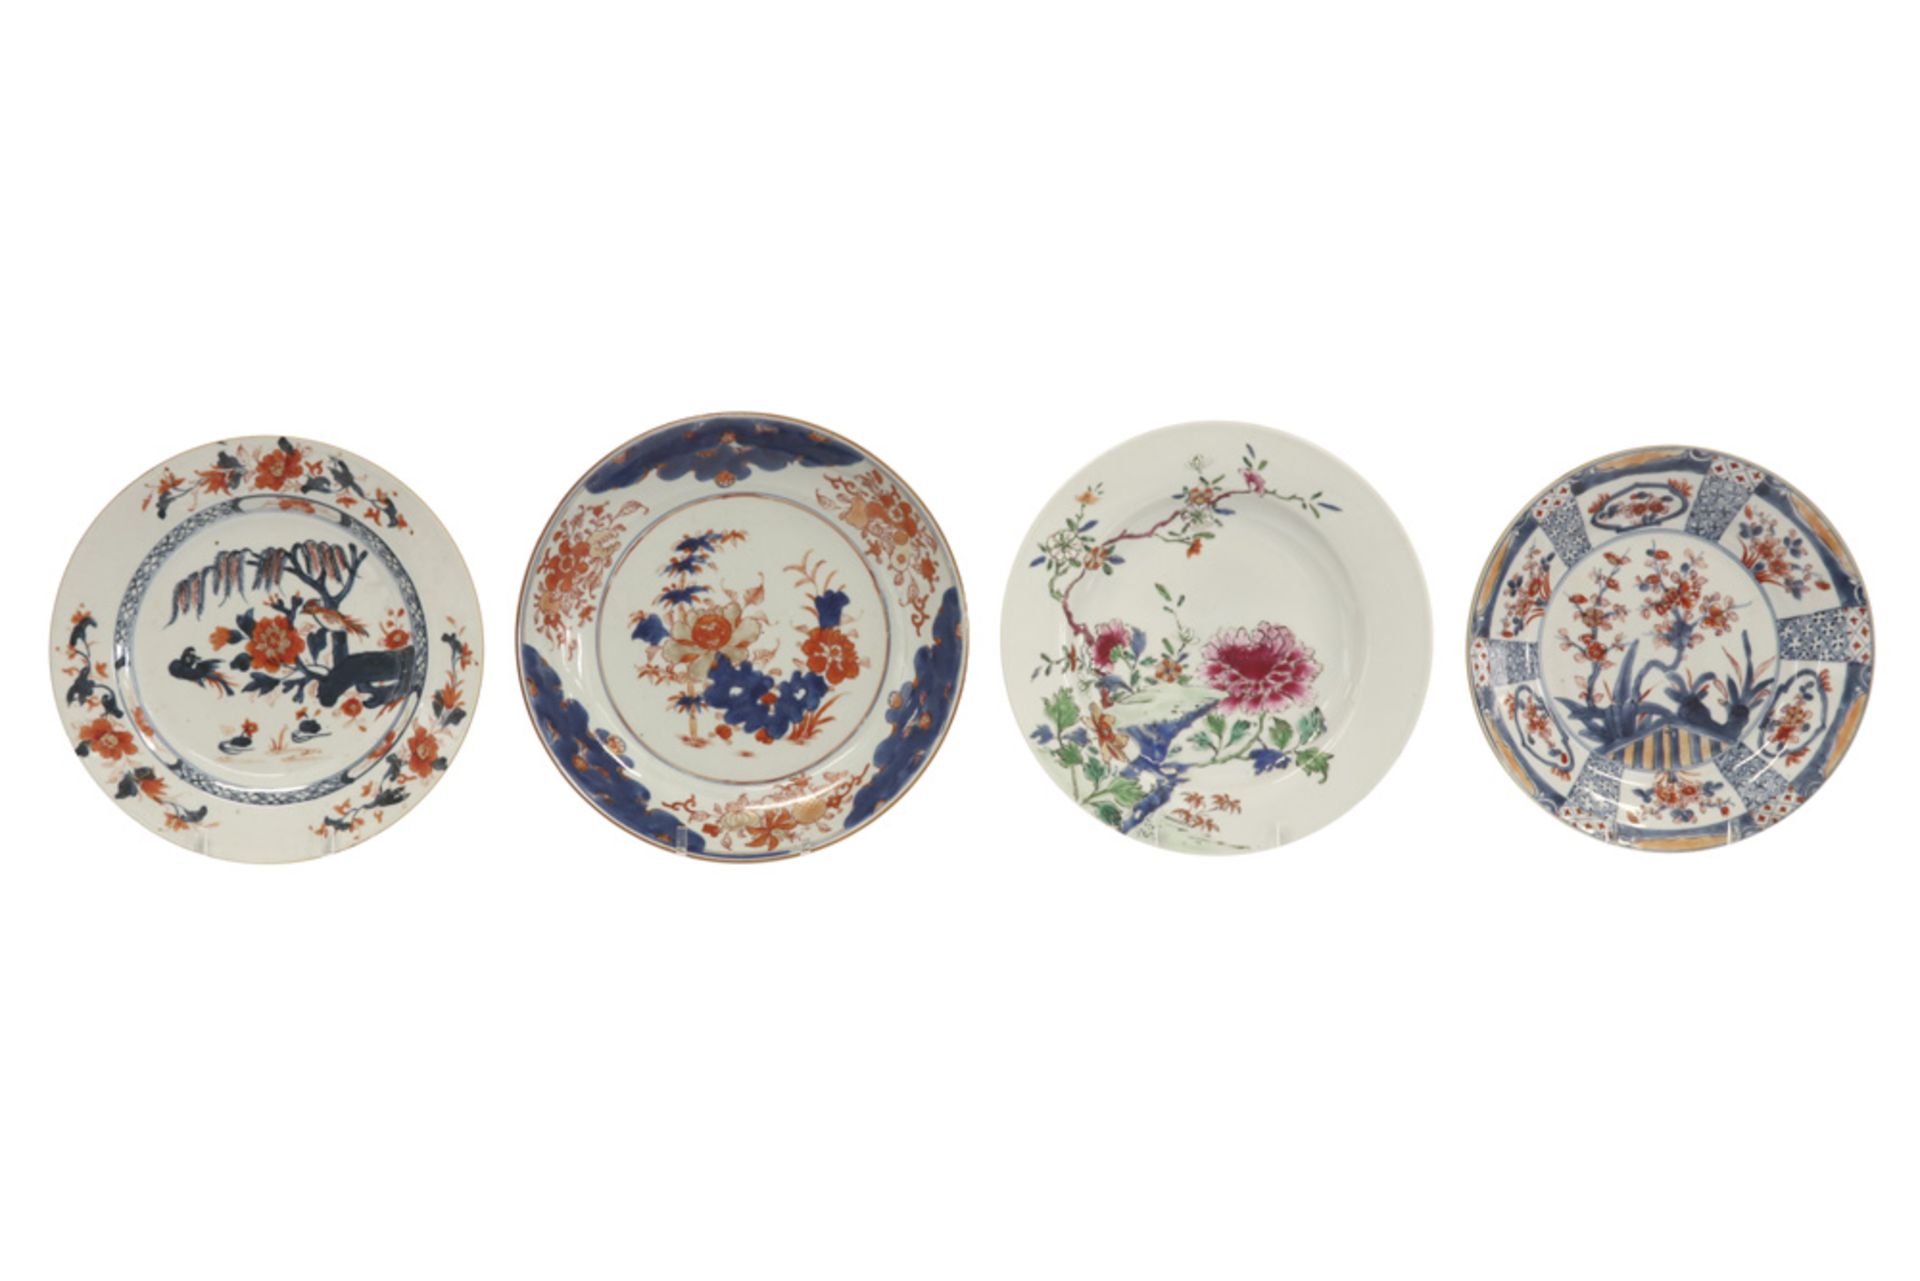 four 18th Cent. Chinese plates in porcelain, three with an Imari and one with a 'Famille Rose' decor